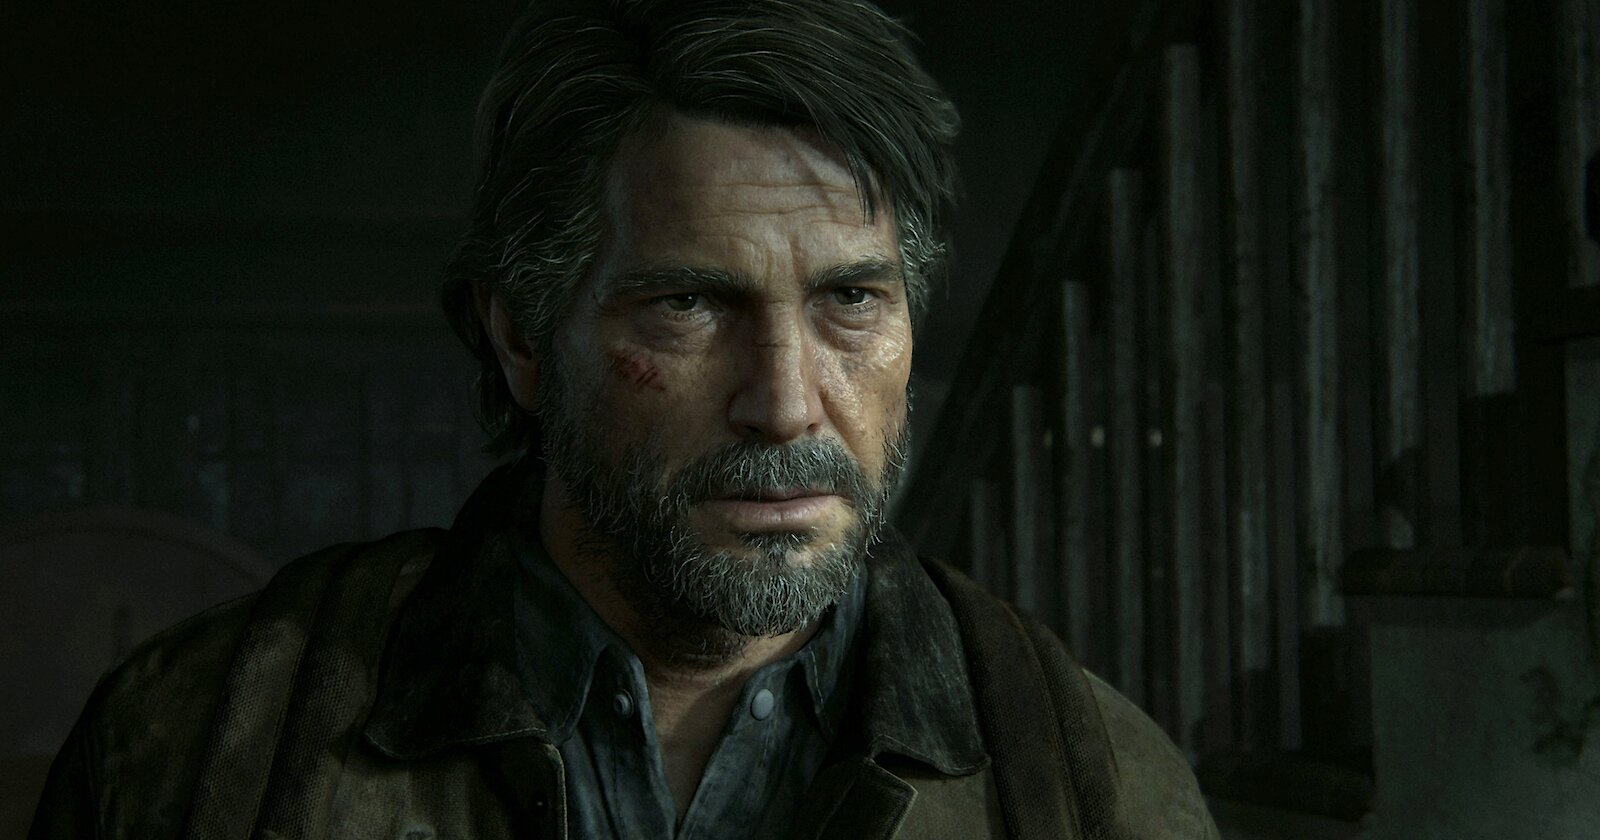 It looks like Naughty Dog plans to Remaster The Last of Us Part 2 - OC3D